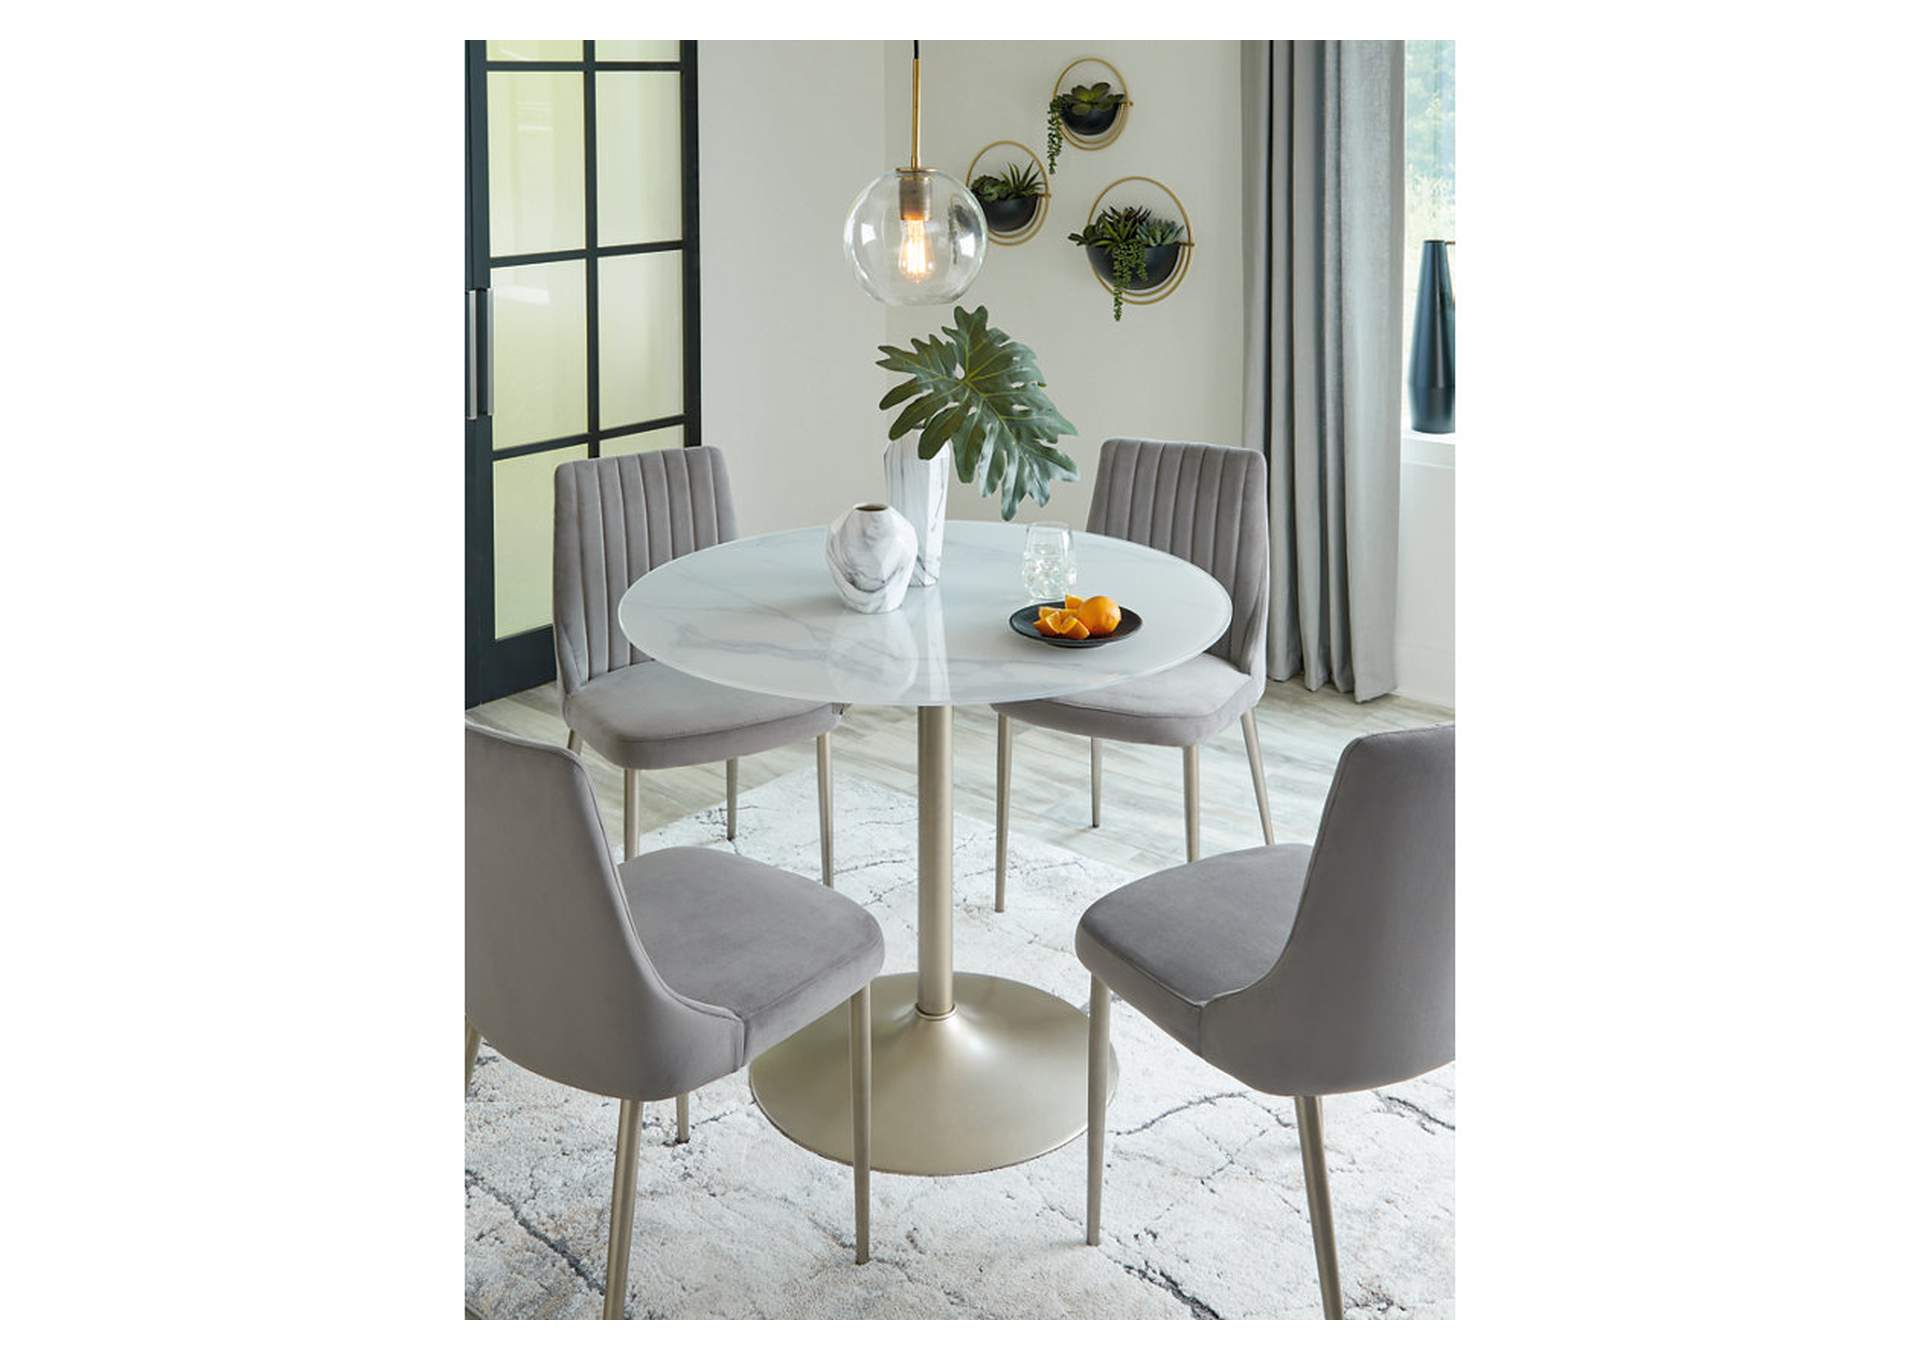 Barchoni Dining Table and 4 Chairs,Signature Design By Ashley